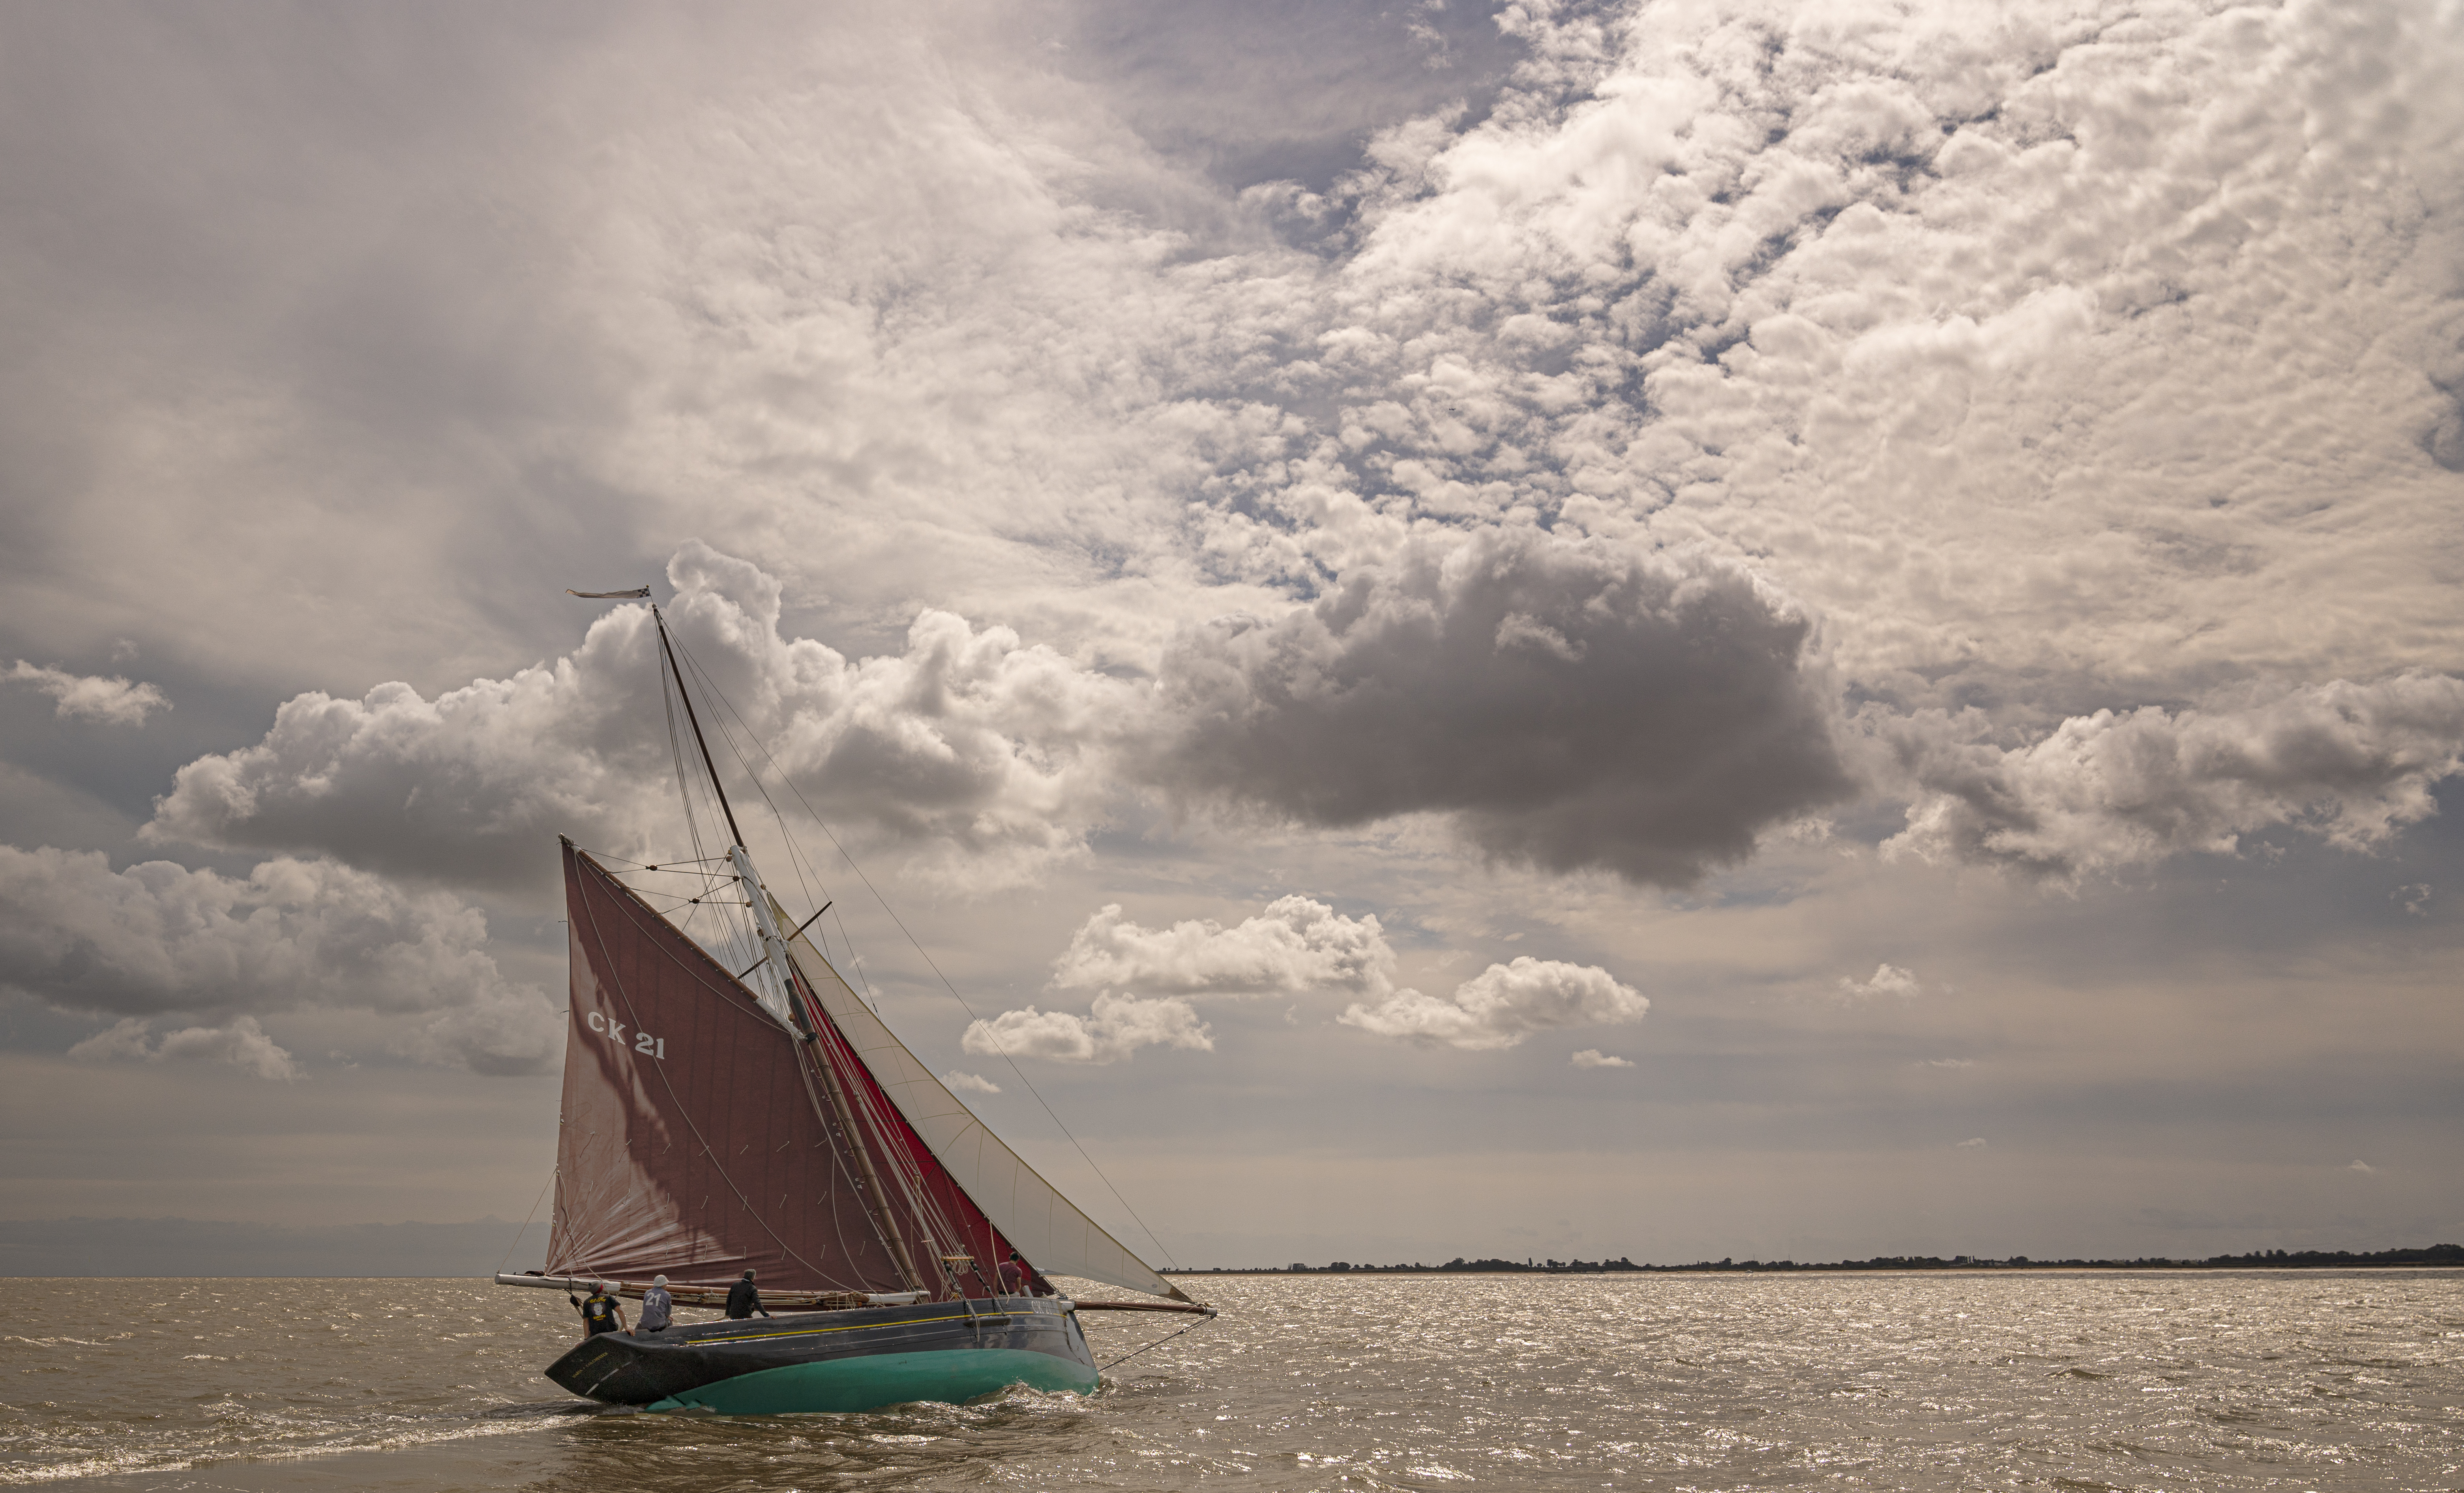 March 2020 Calendar image - Maria enjoying an early spring sail by Peter Pangbourne